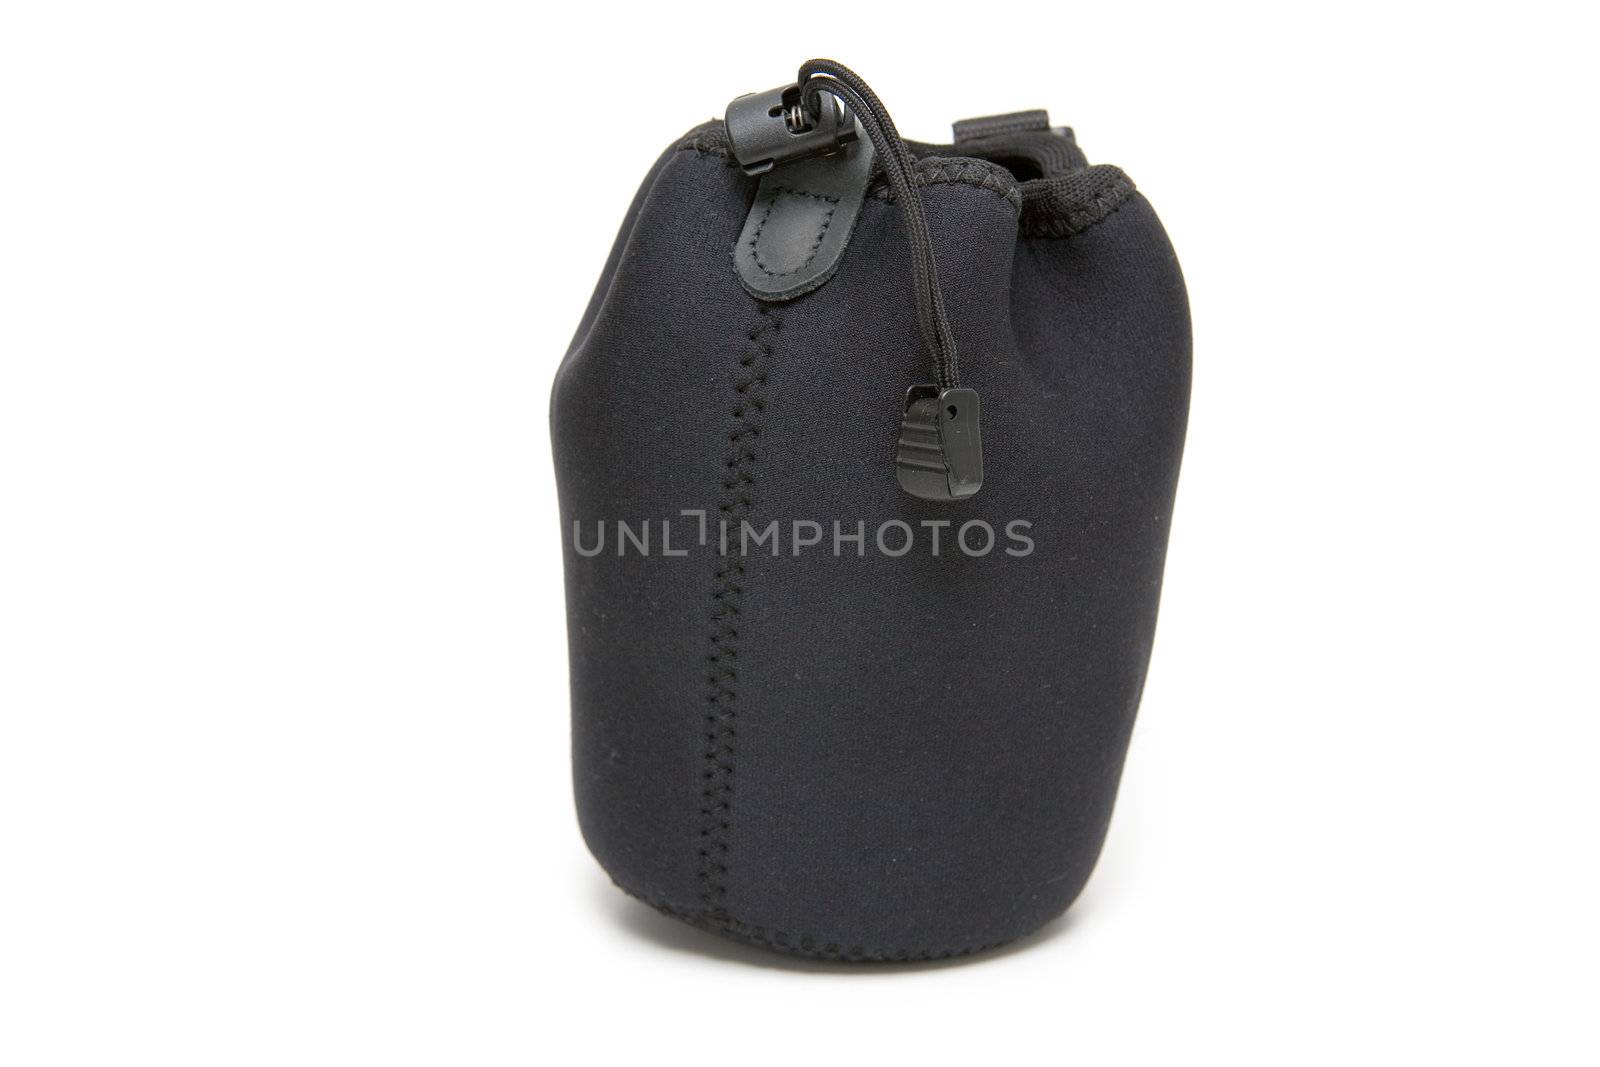 Soft black carrying pouch for fragile devices and equipment